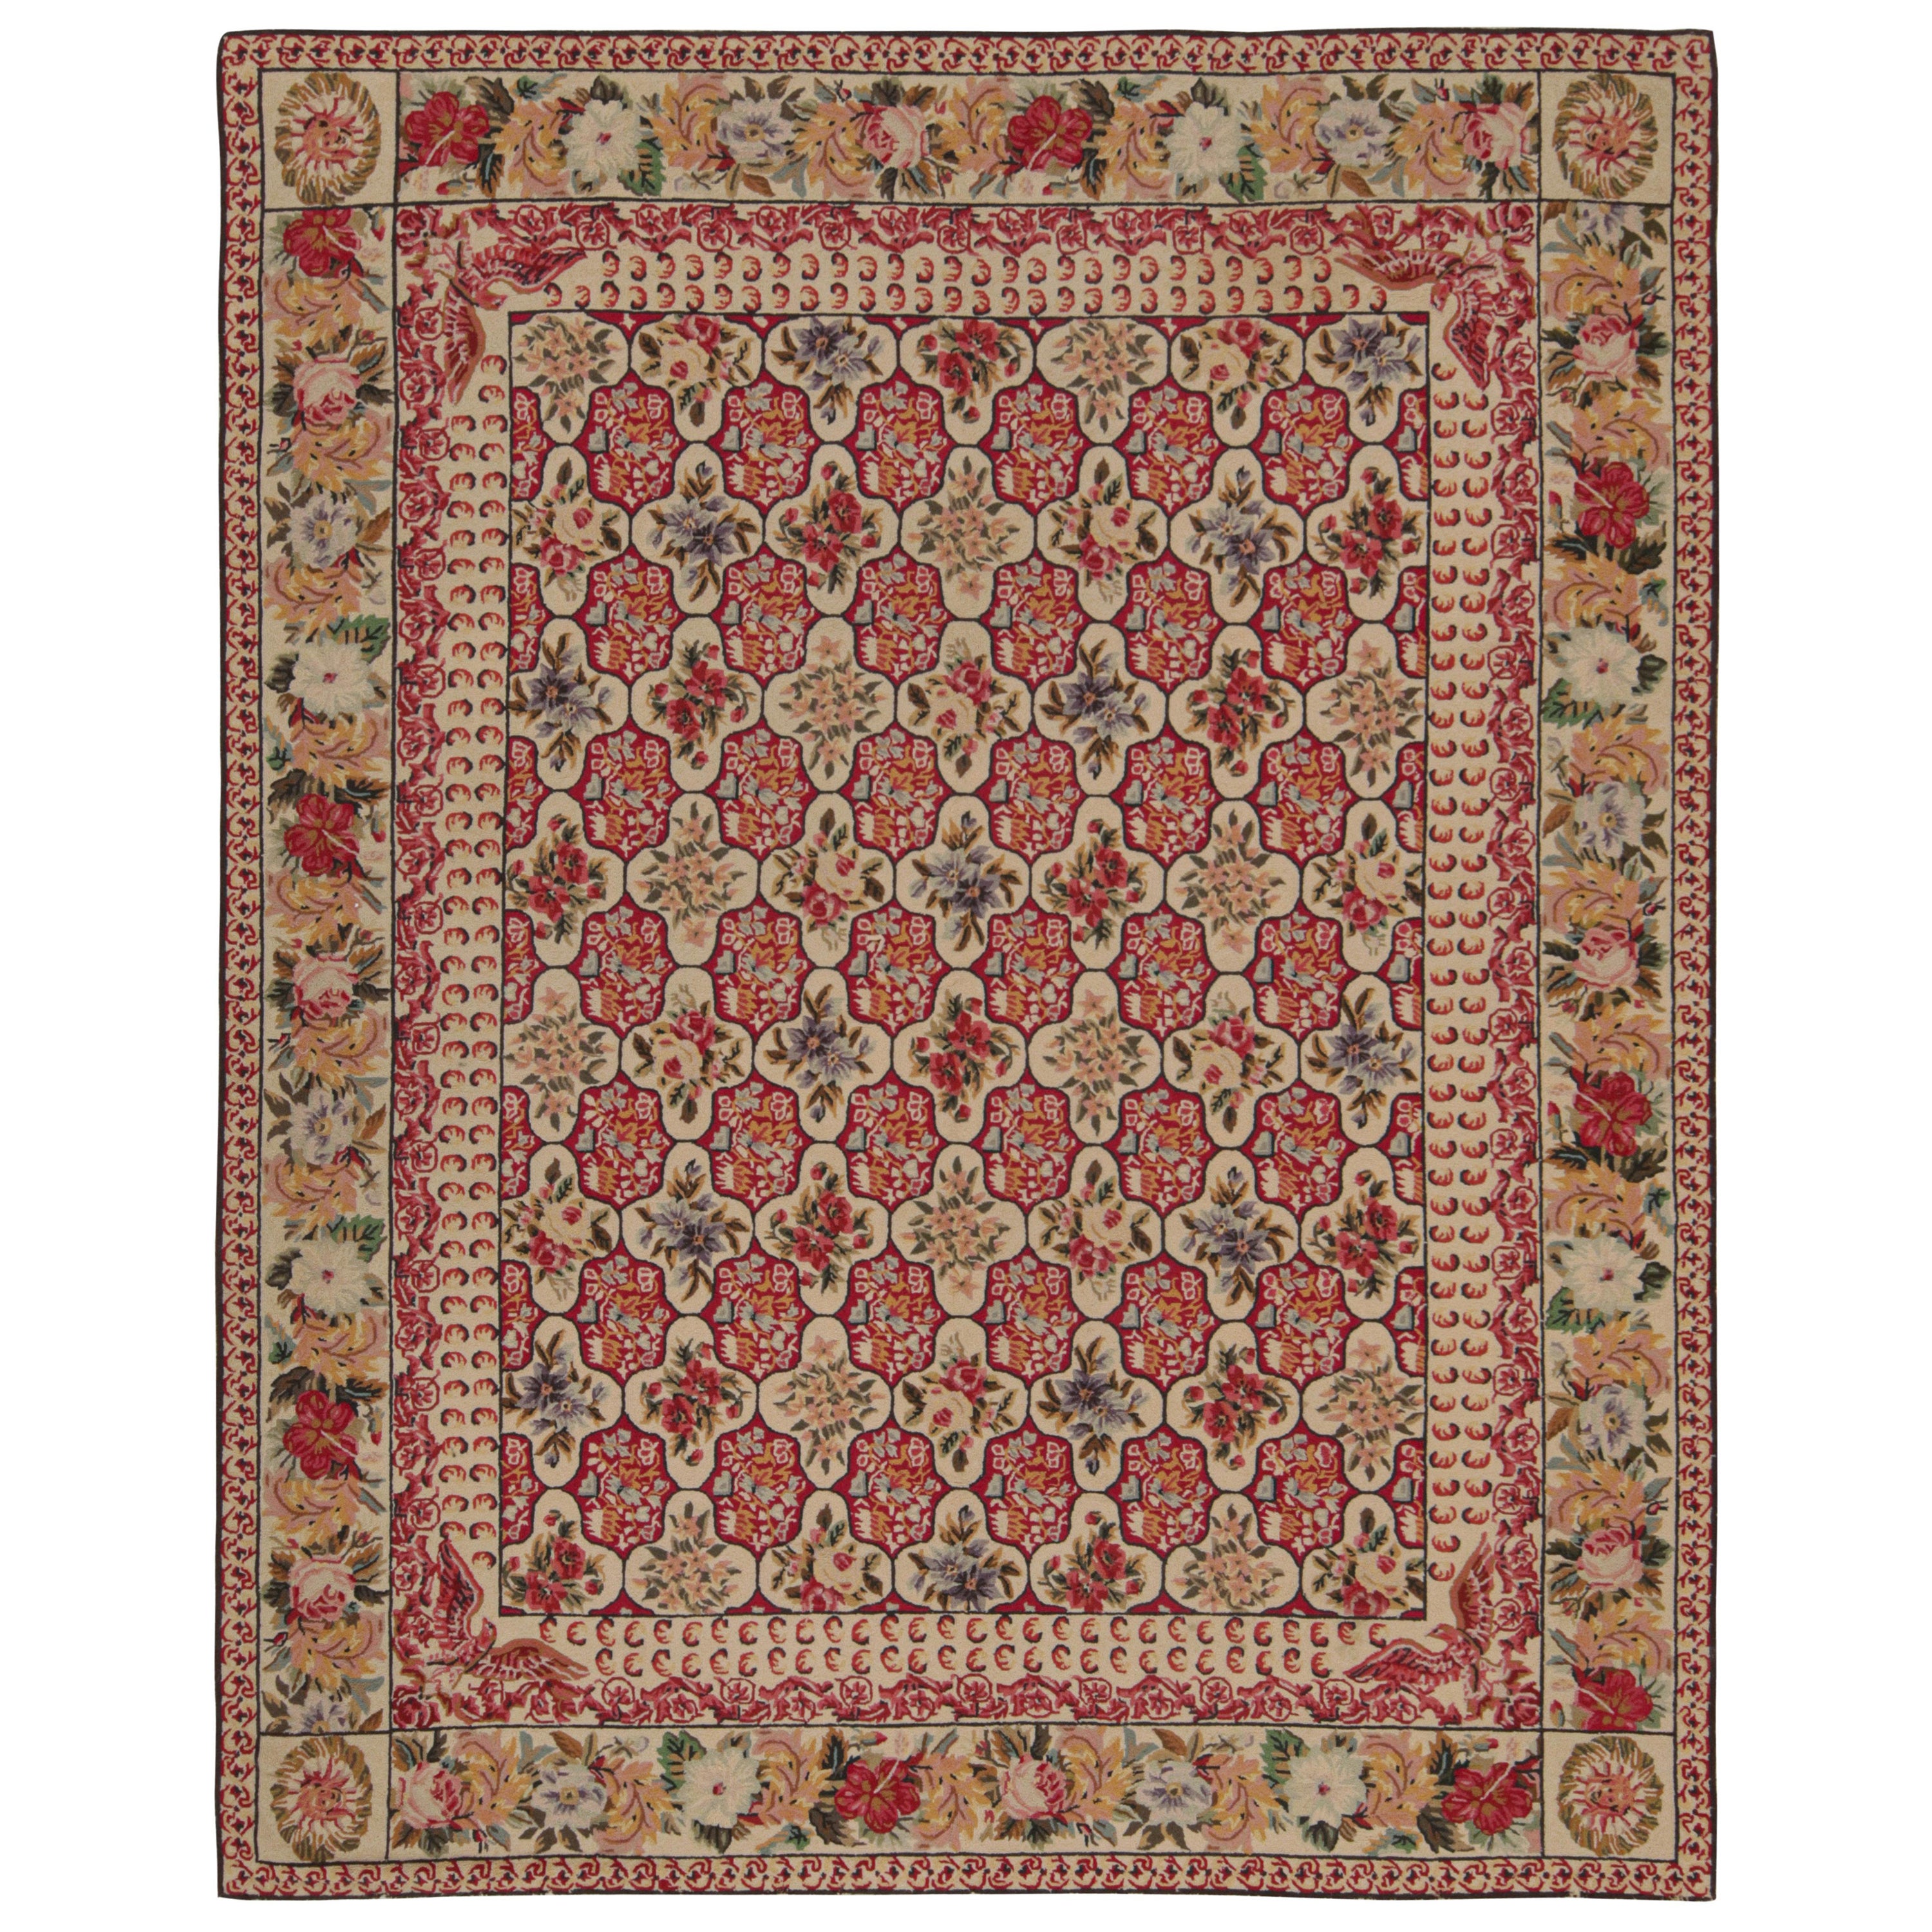 Rare Antique Hooked Rug with Red & Beige Floral Patterns, from Rug & Kilim